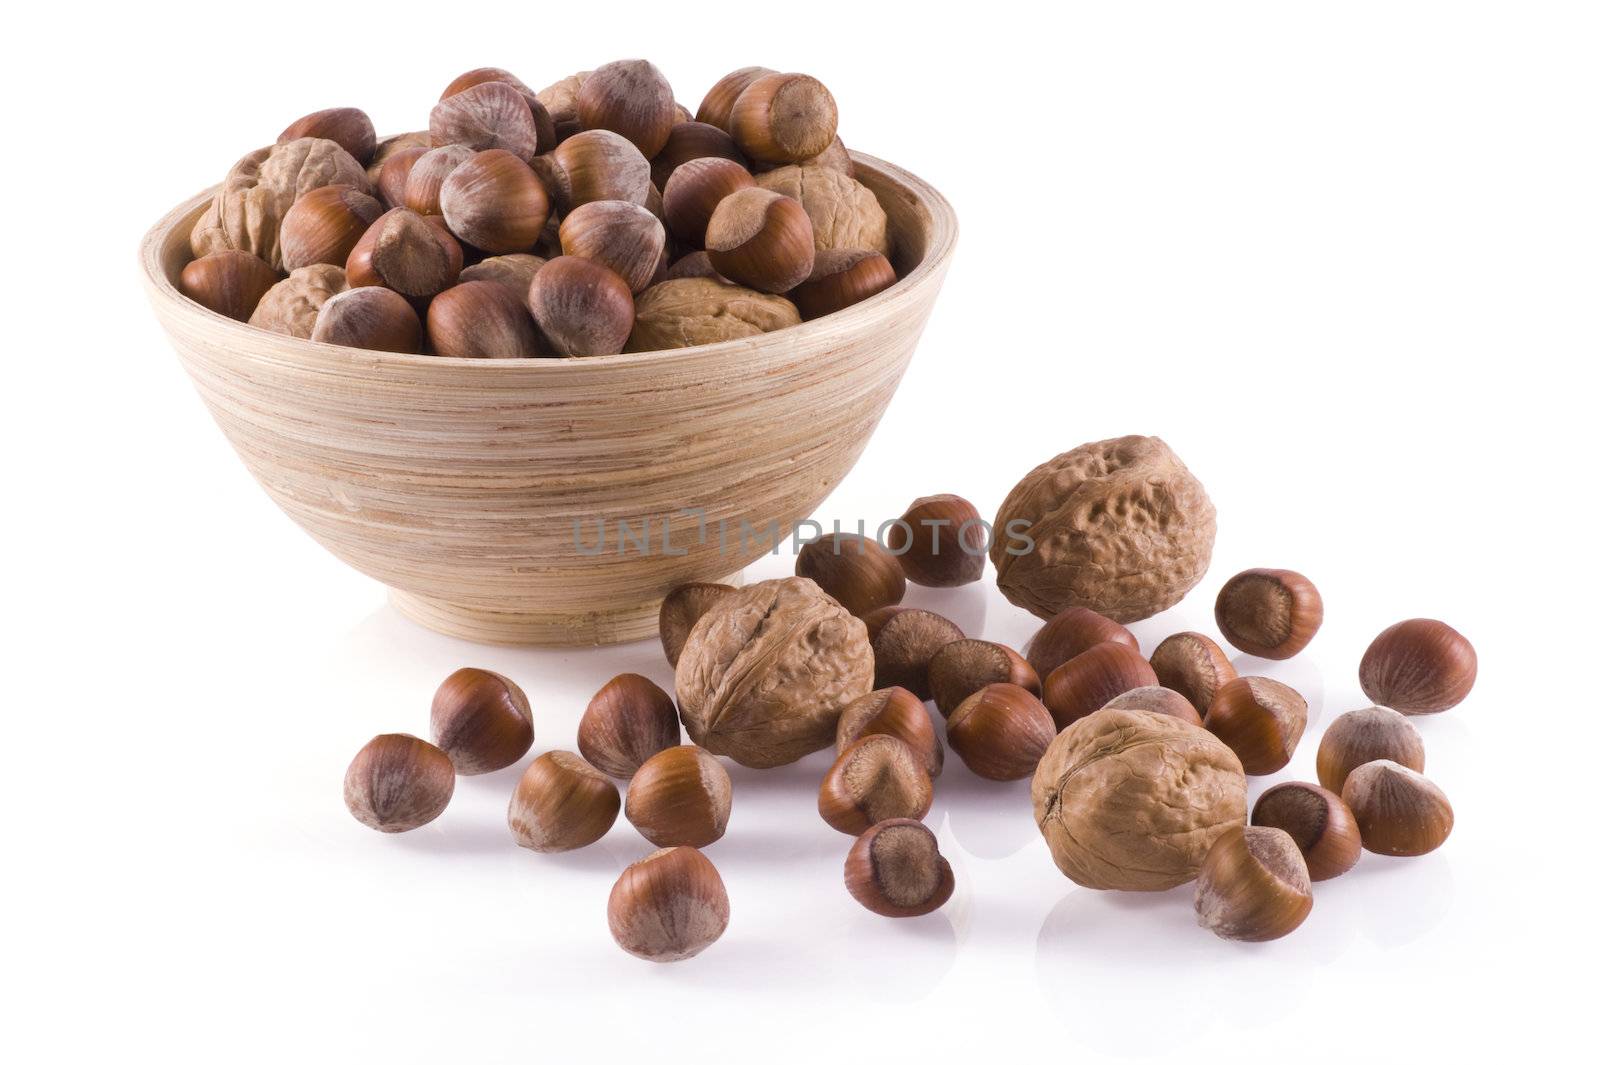 Hazelnuts and walnuts in and around a wooden bowl, isolated on white.